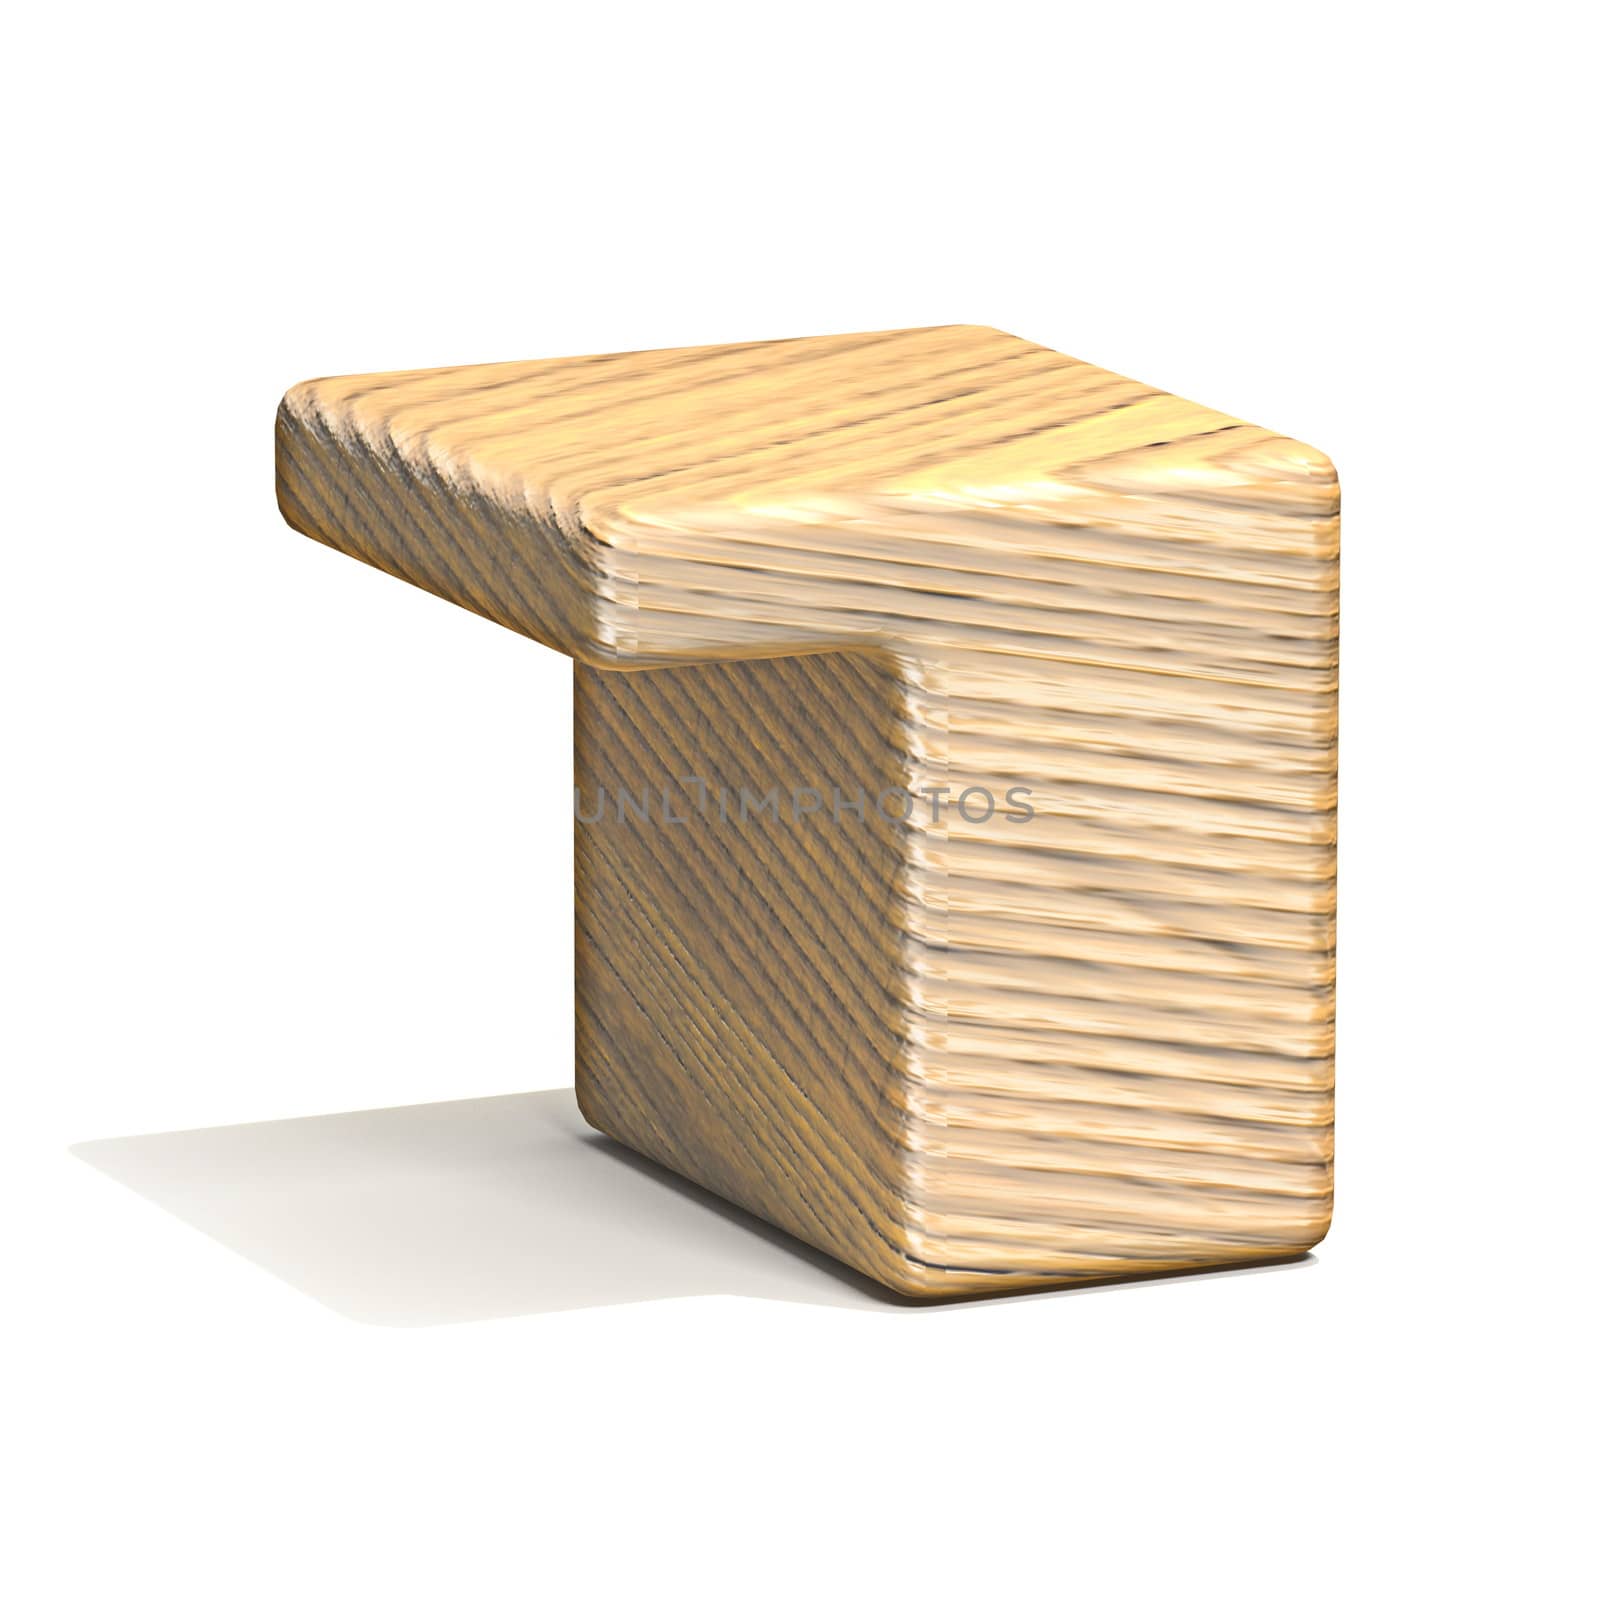 Solid wooden cube font Number 7 SEVEN 3D by djmilic